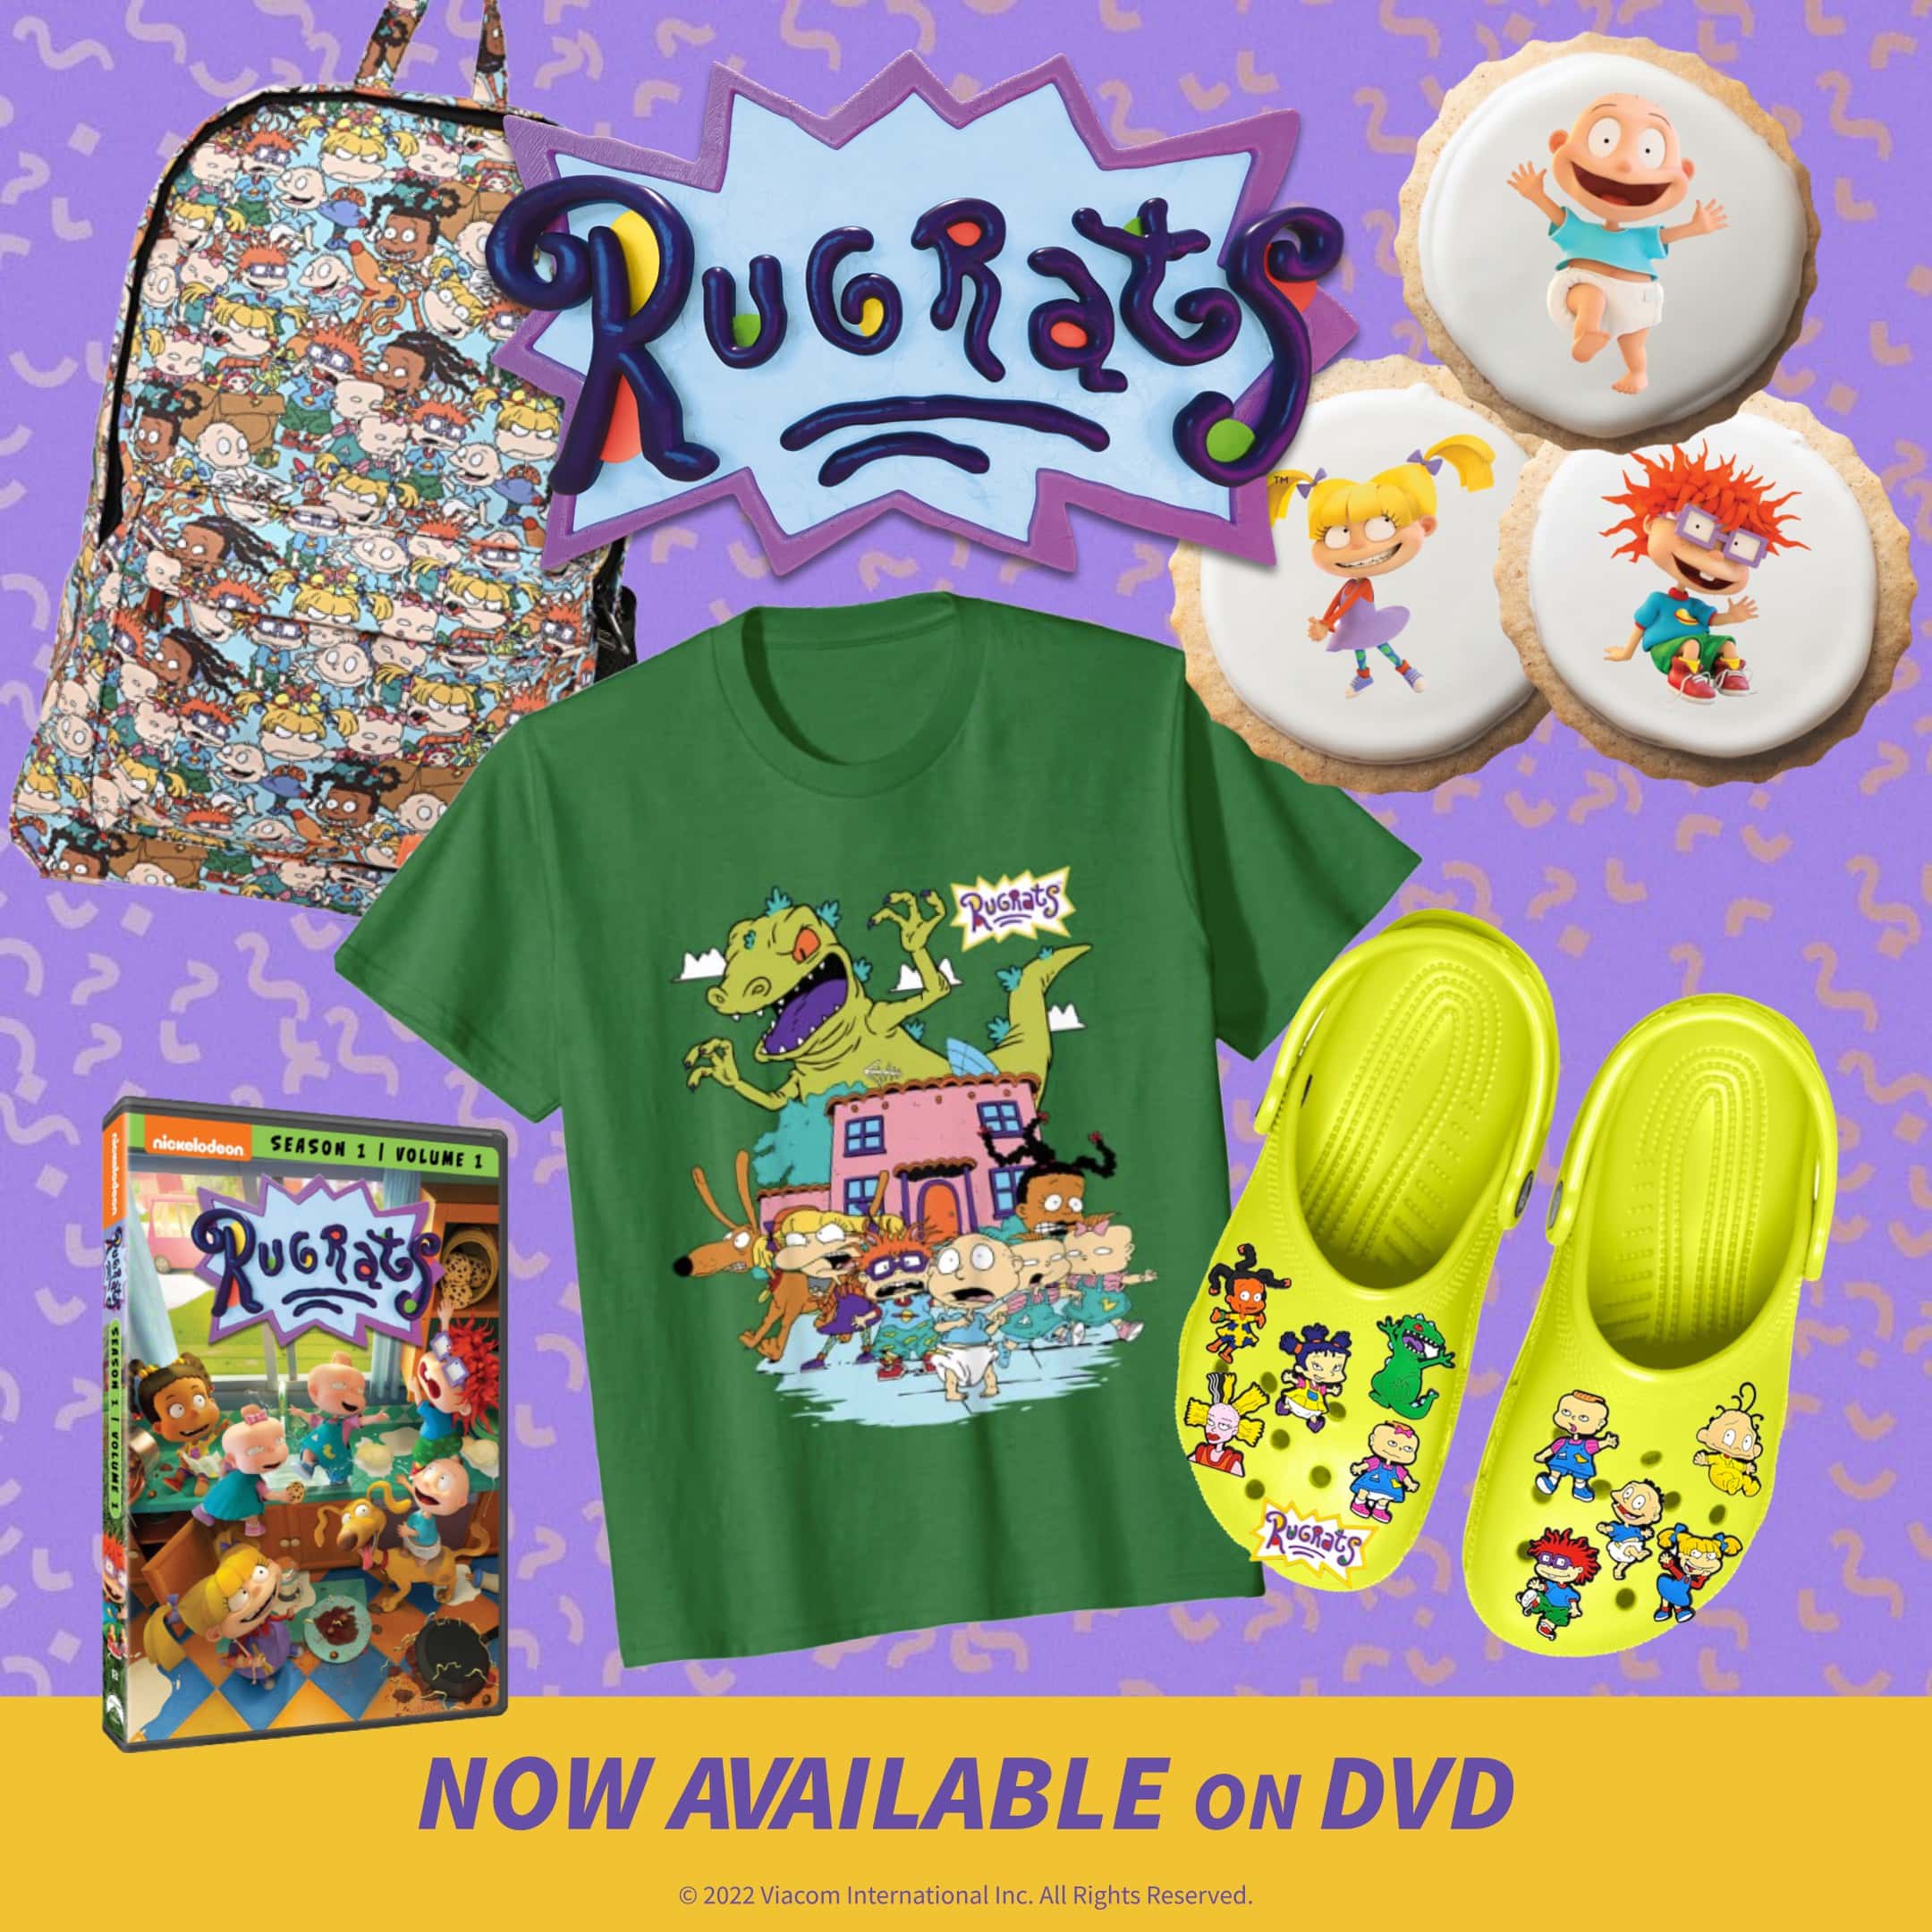 rugrats twitter party prizes